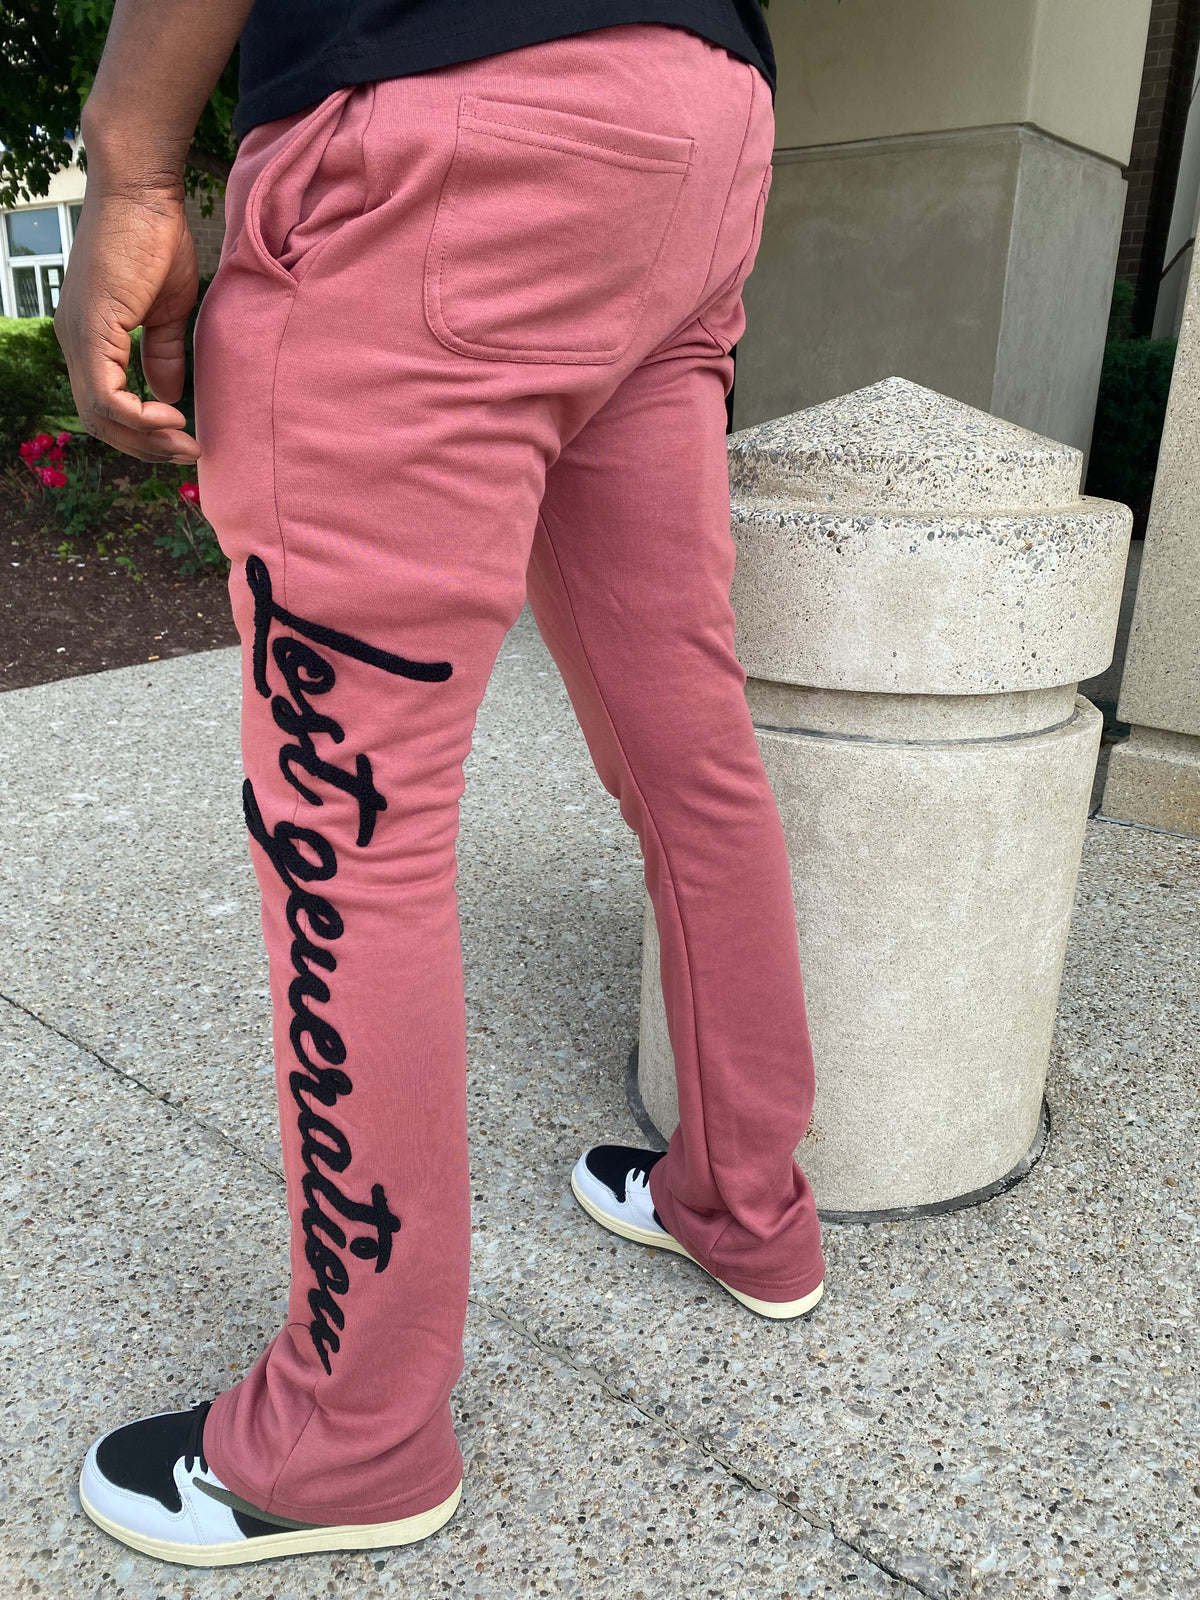 Lost Generations 2 Stacked Sweatpants - Mauve – Todays Man Store